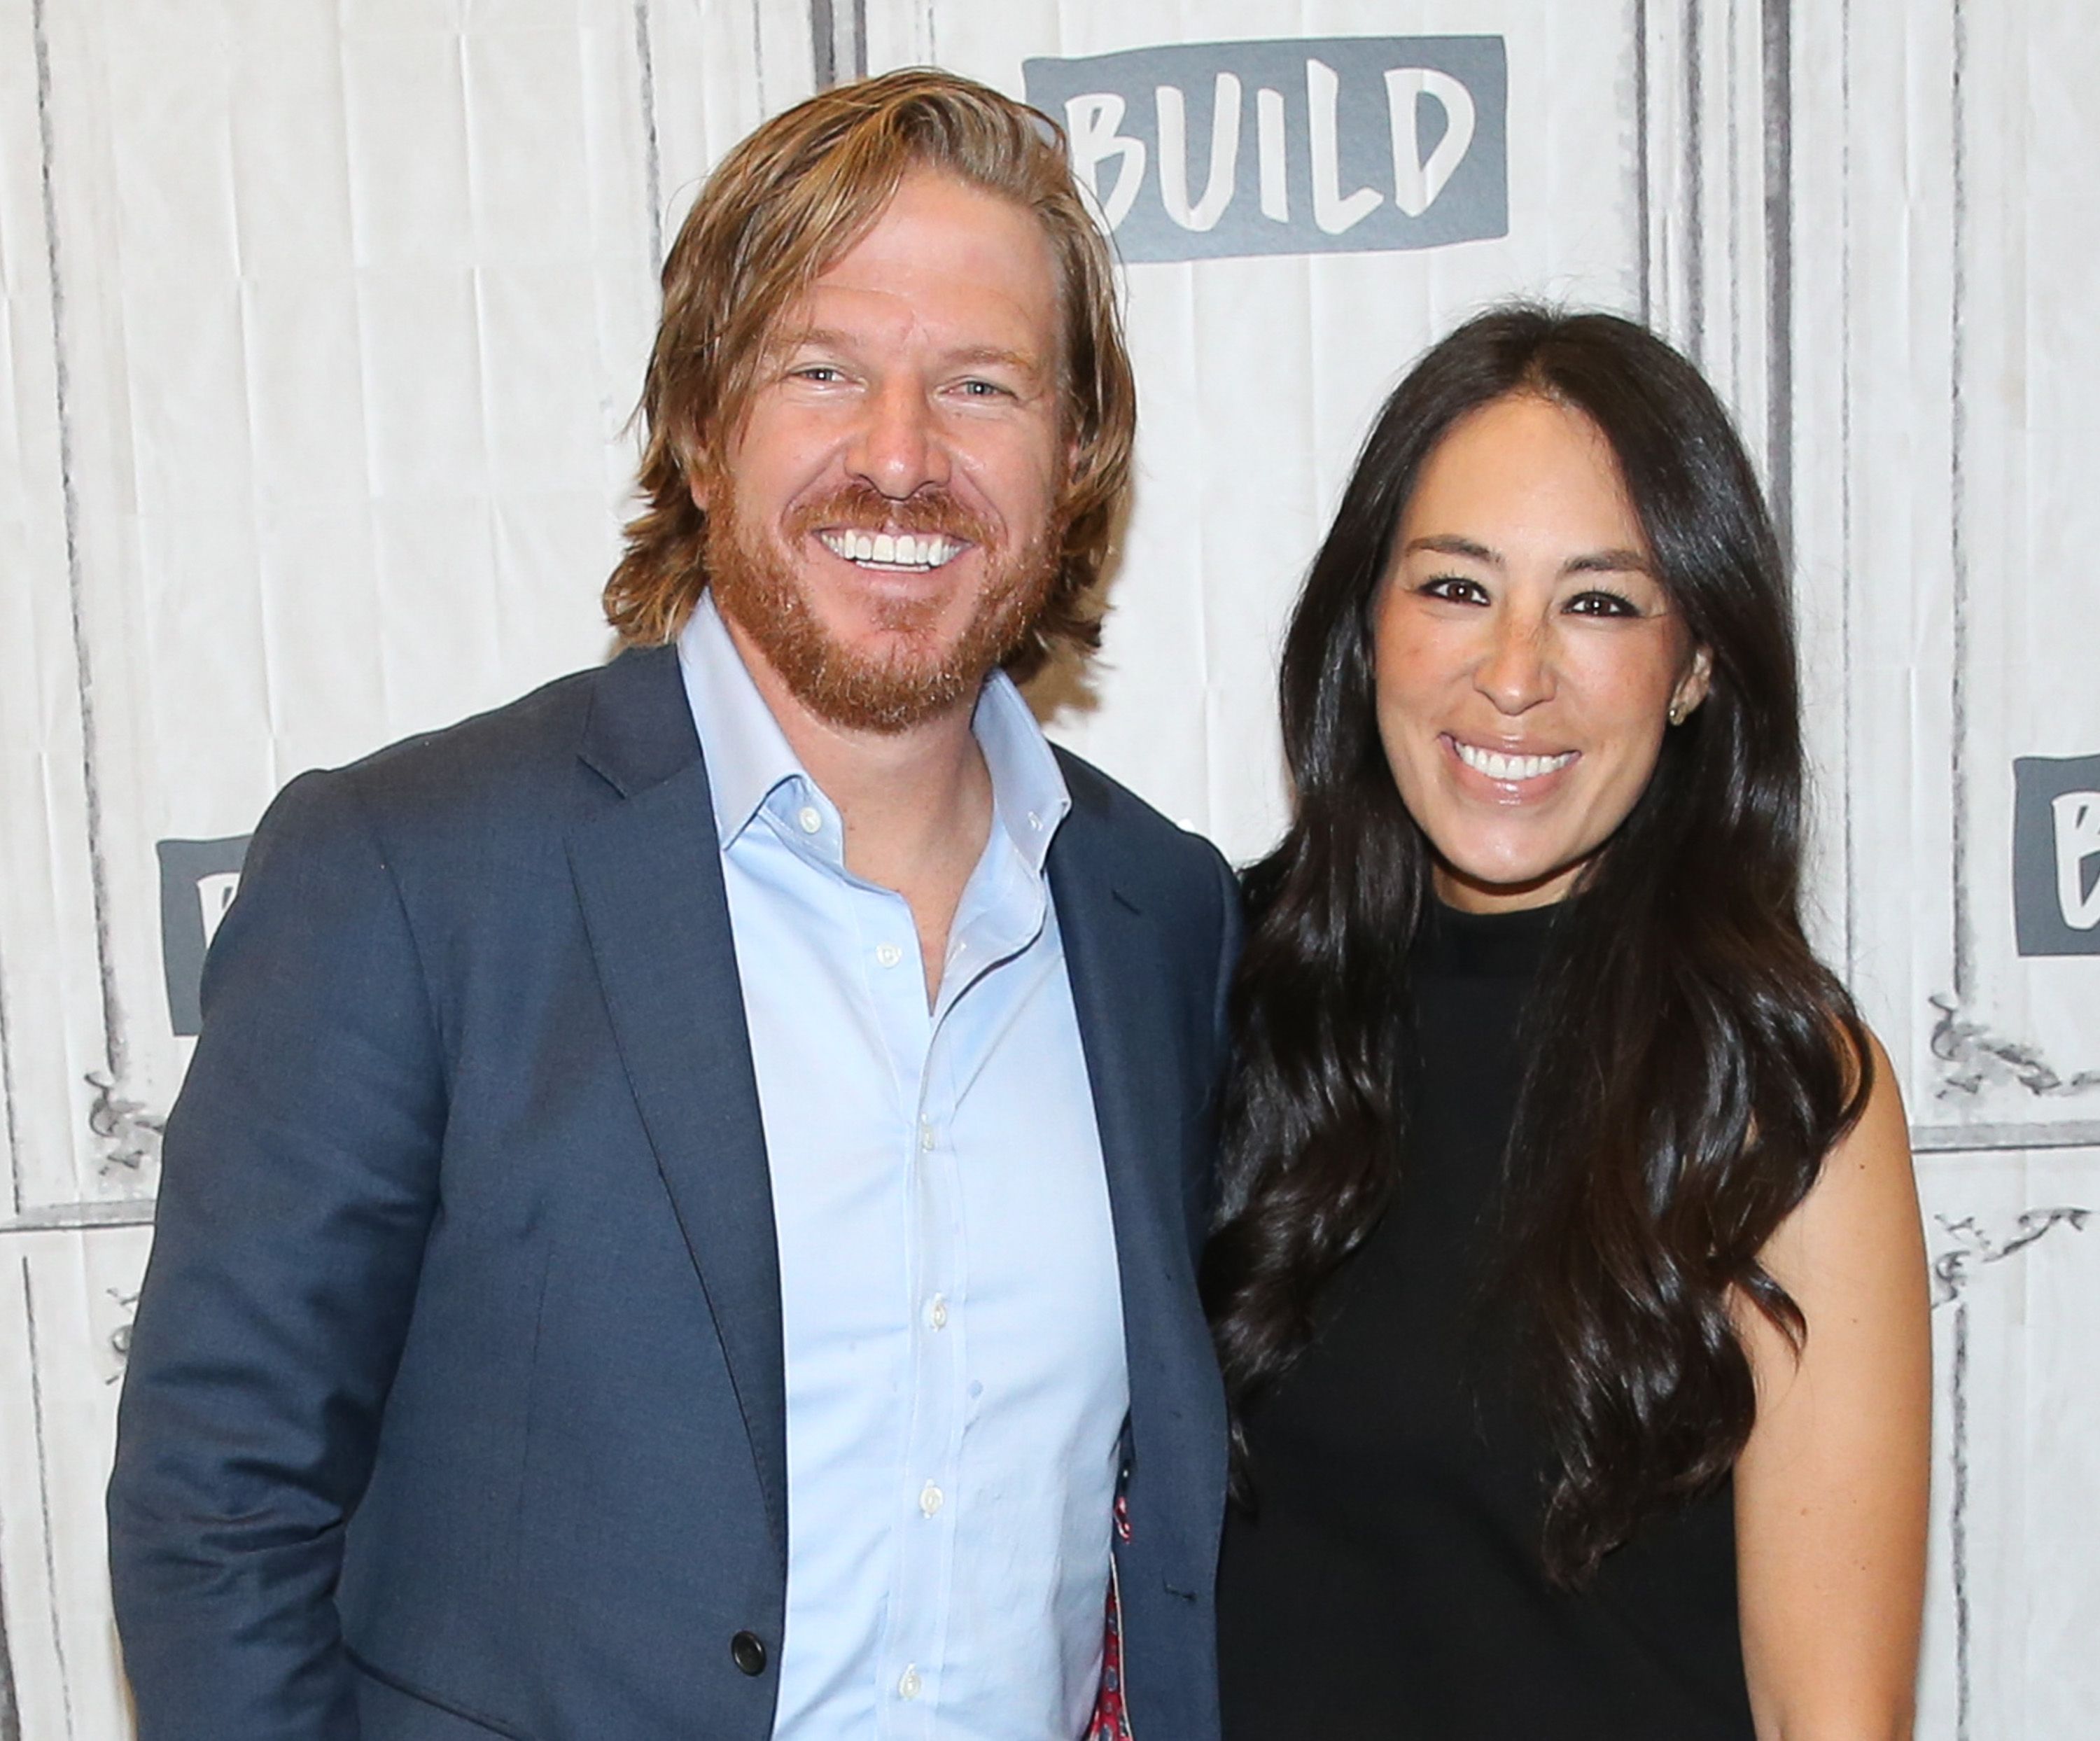  Chip Gaines and Joanna Gaines at the Build Series at Build Studio on October 18, 2017 in New York City | Photo: Getty Images